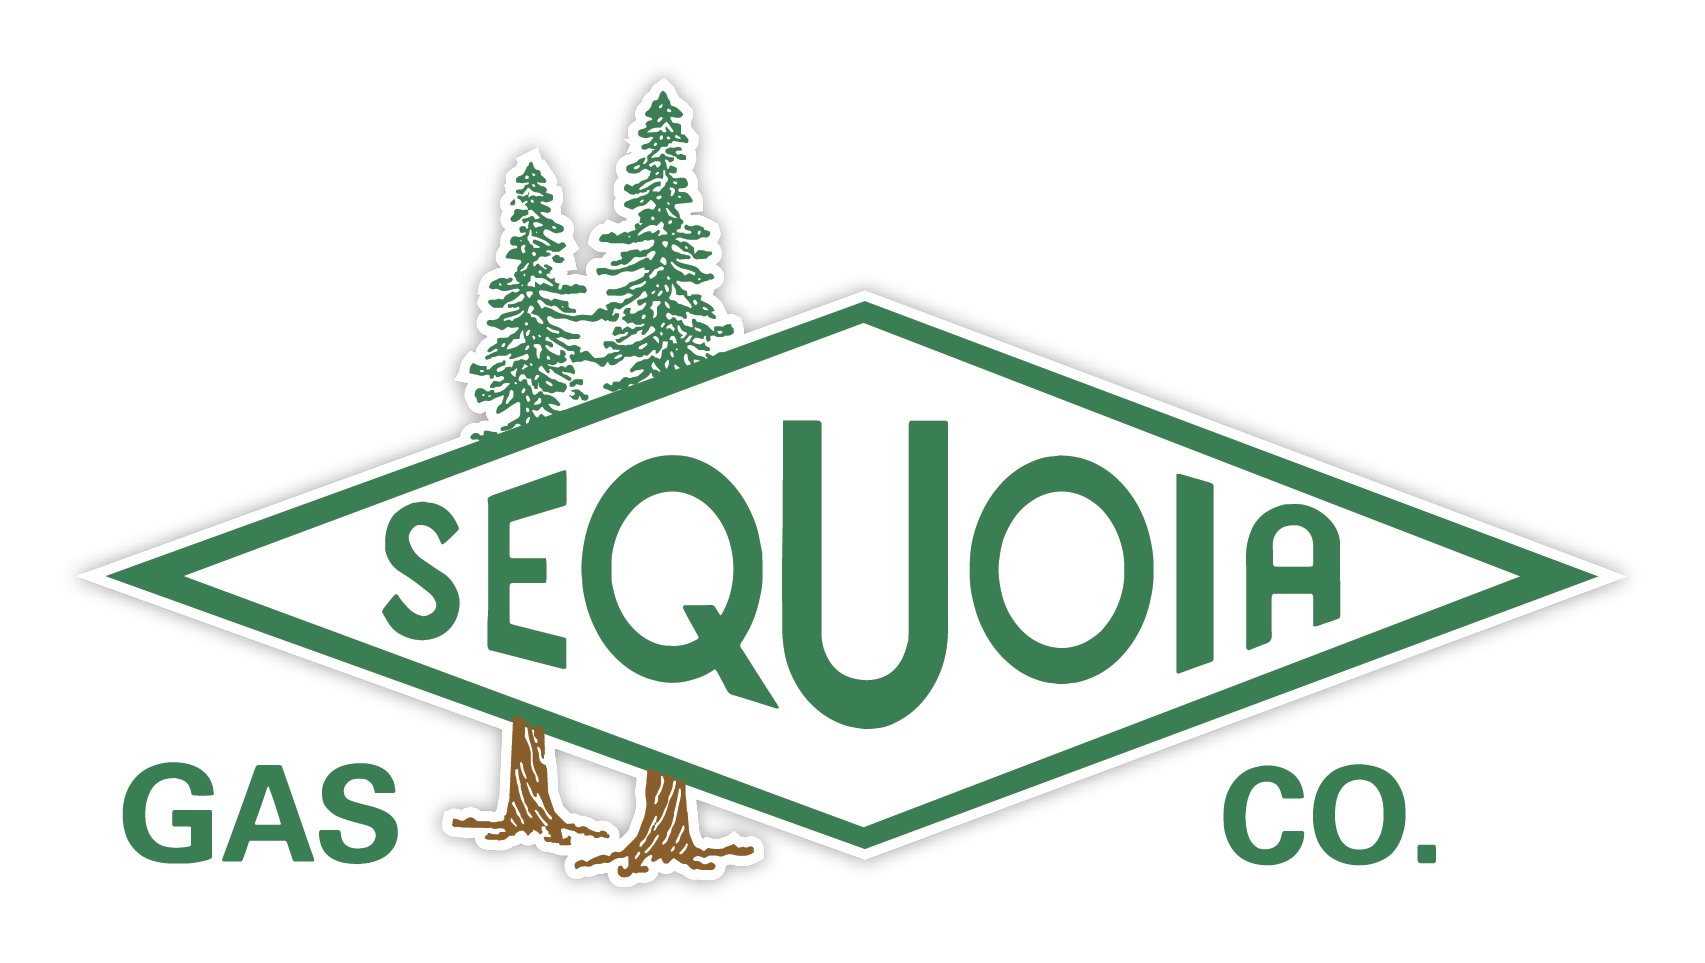 Sequoia Gas Company Family owned propane company since 1930